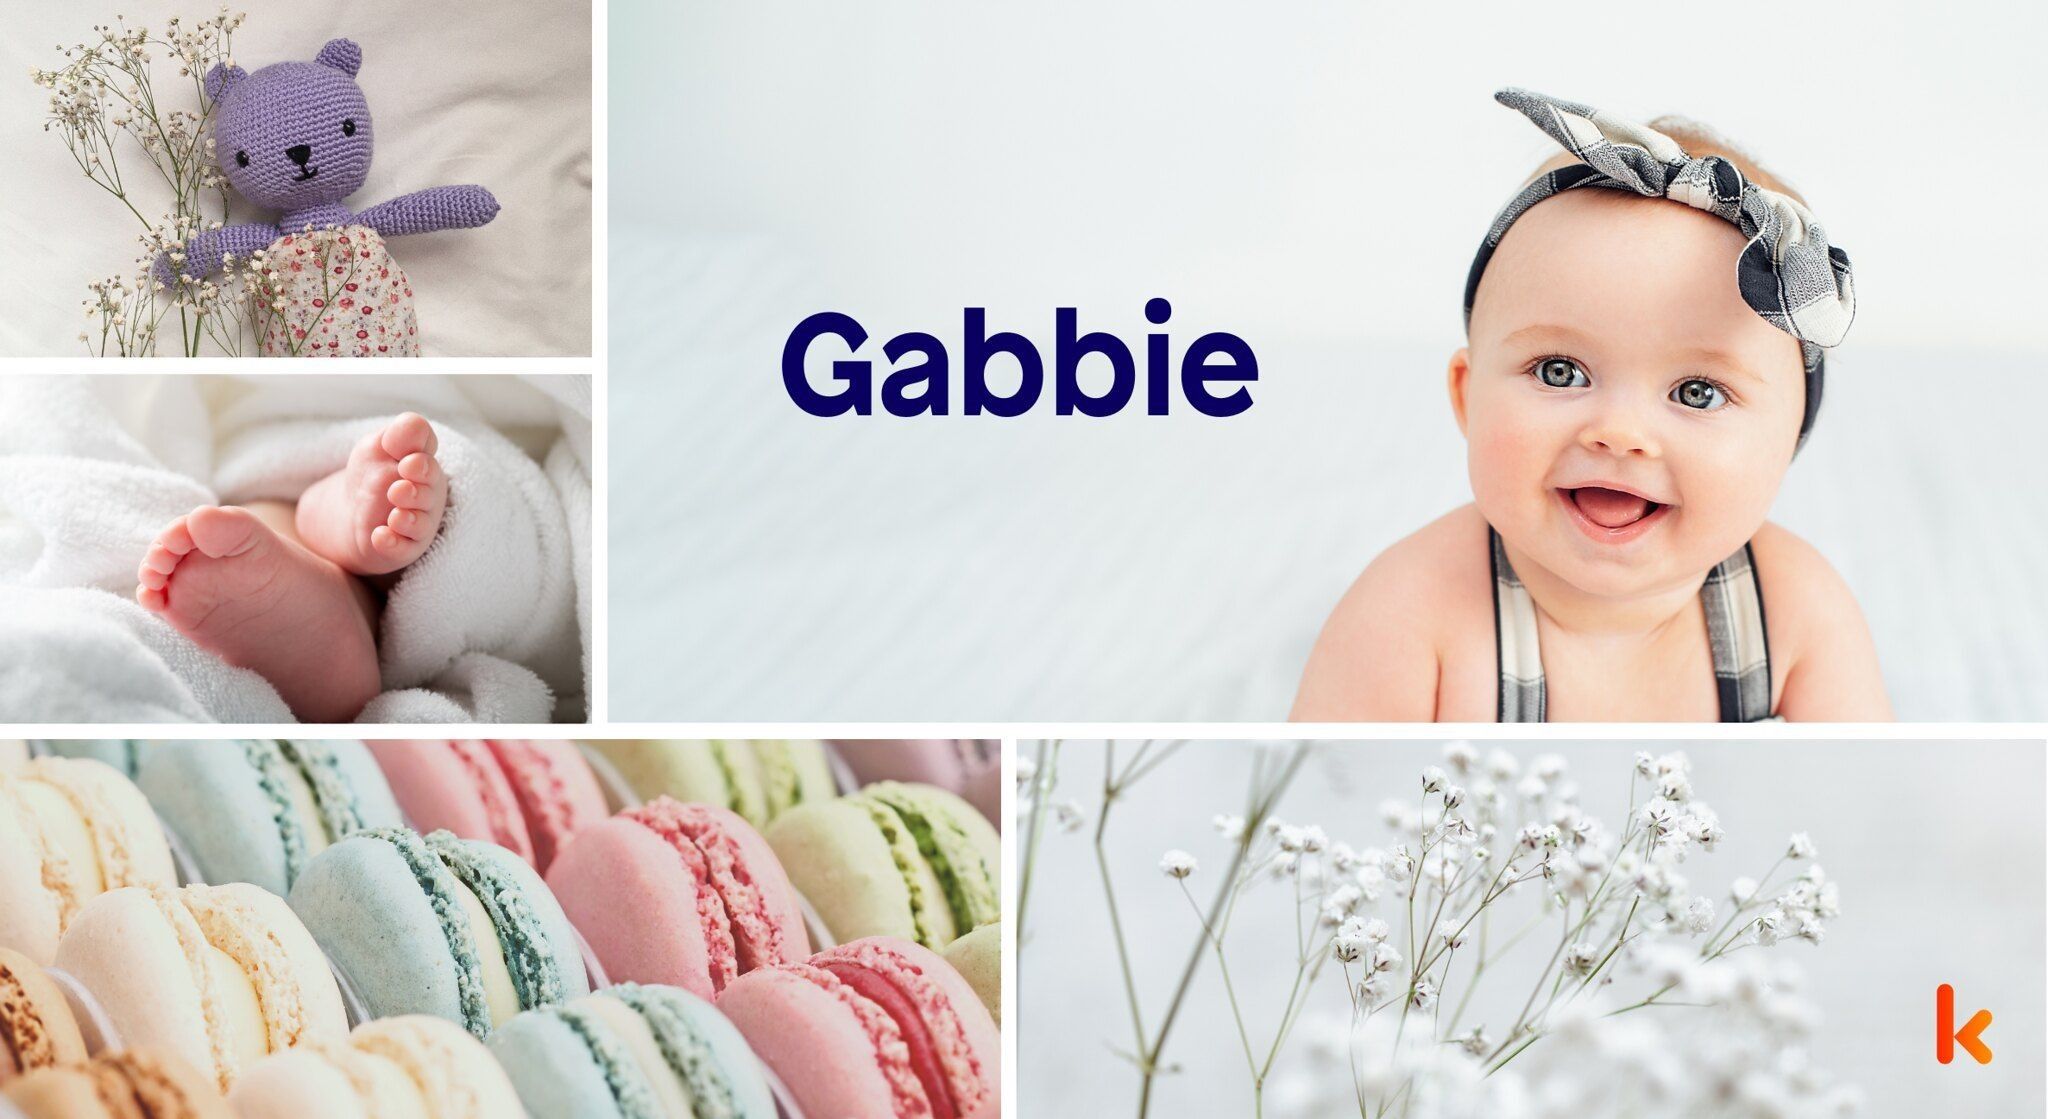 Meaning of the name Gabbie